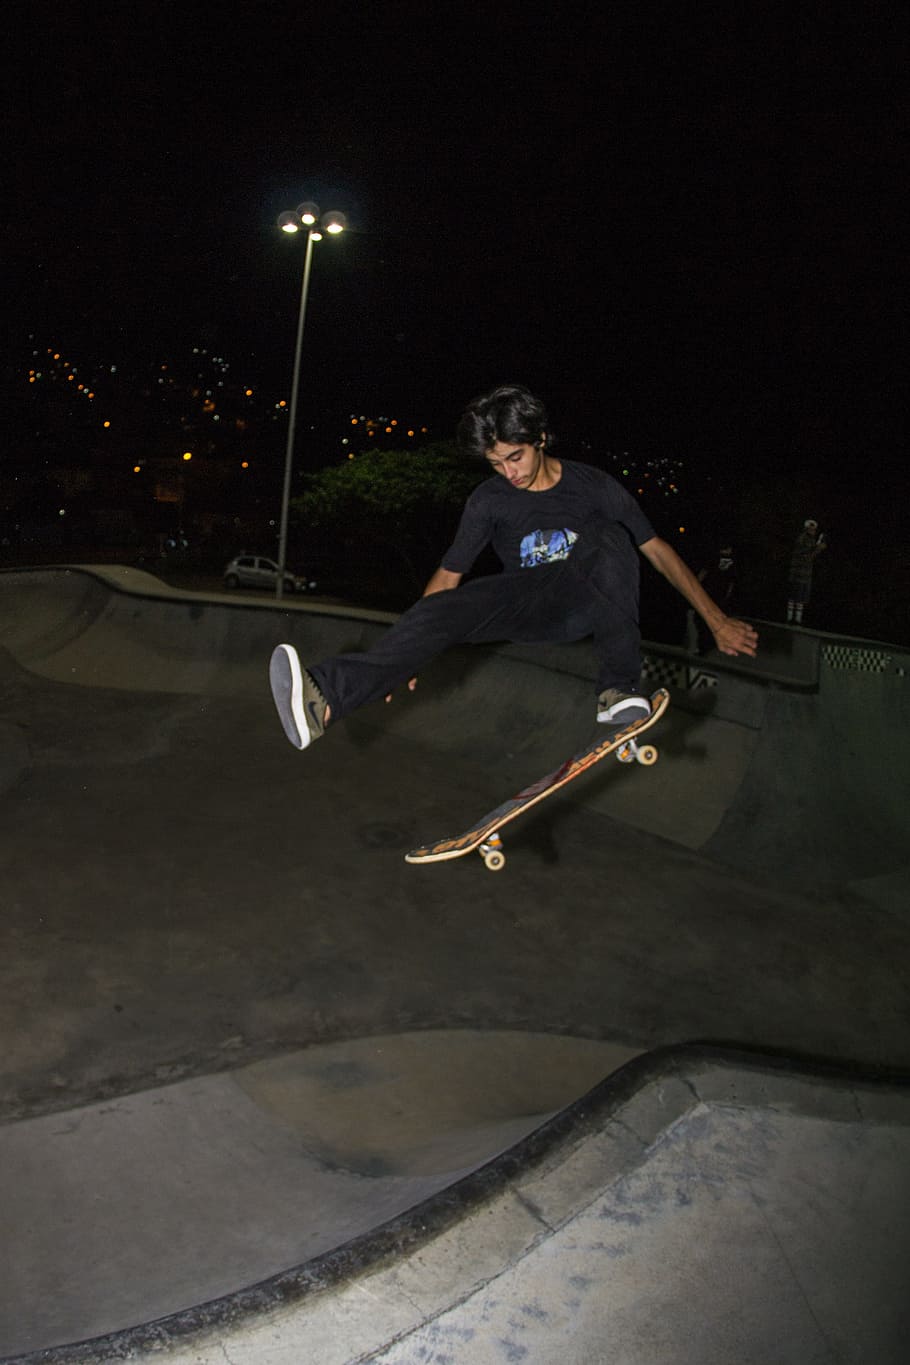 skateboard, extreme sport, florianopolis, full length, skateboard park, leisure activity, one person, skill, casual clothing, mid-air